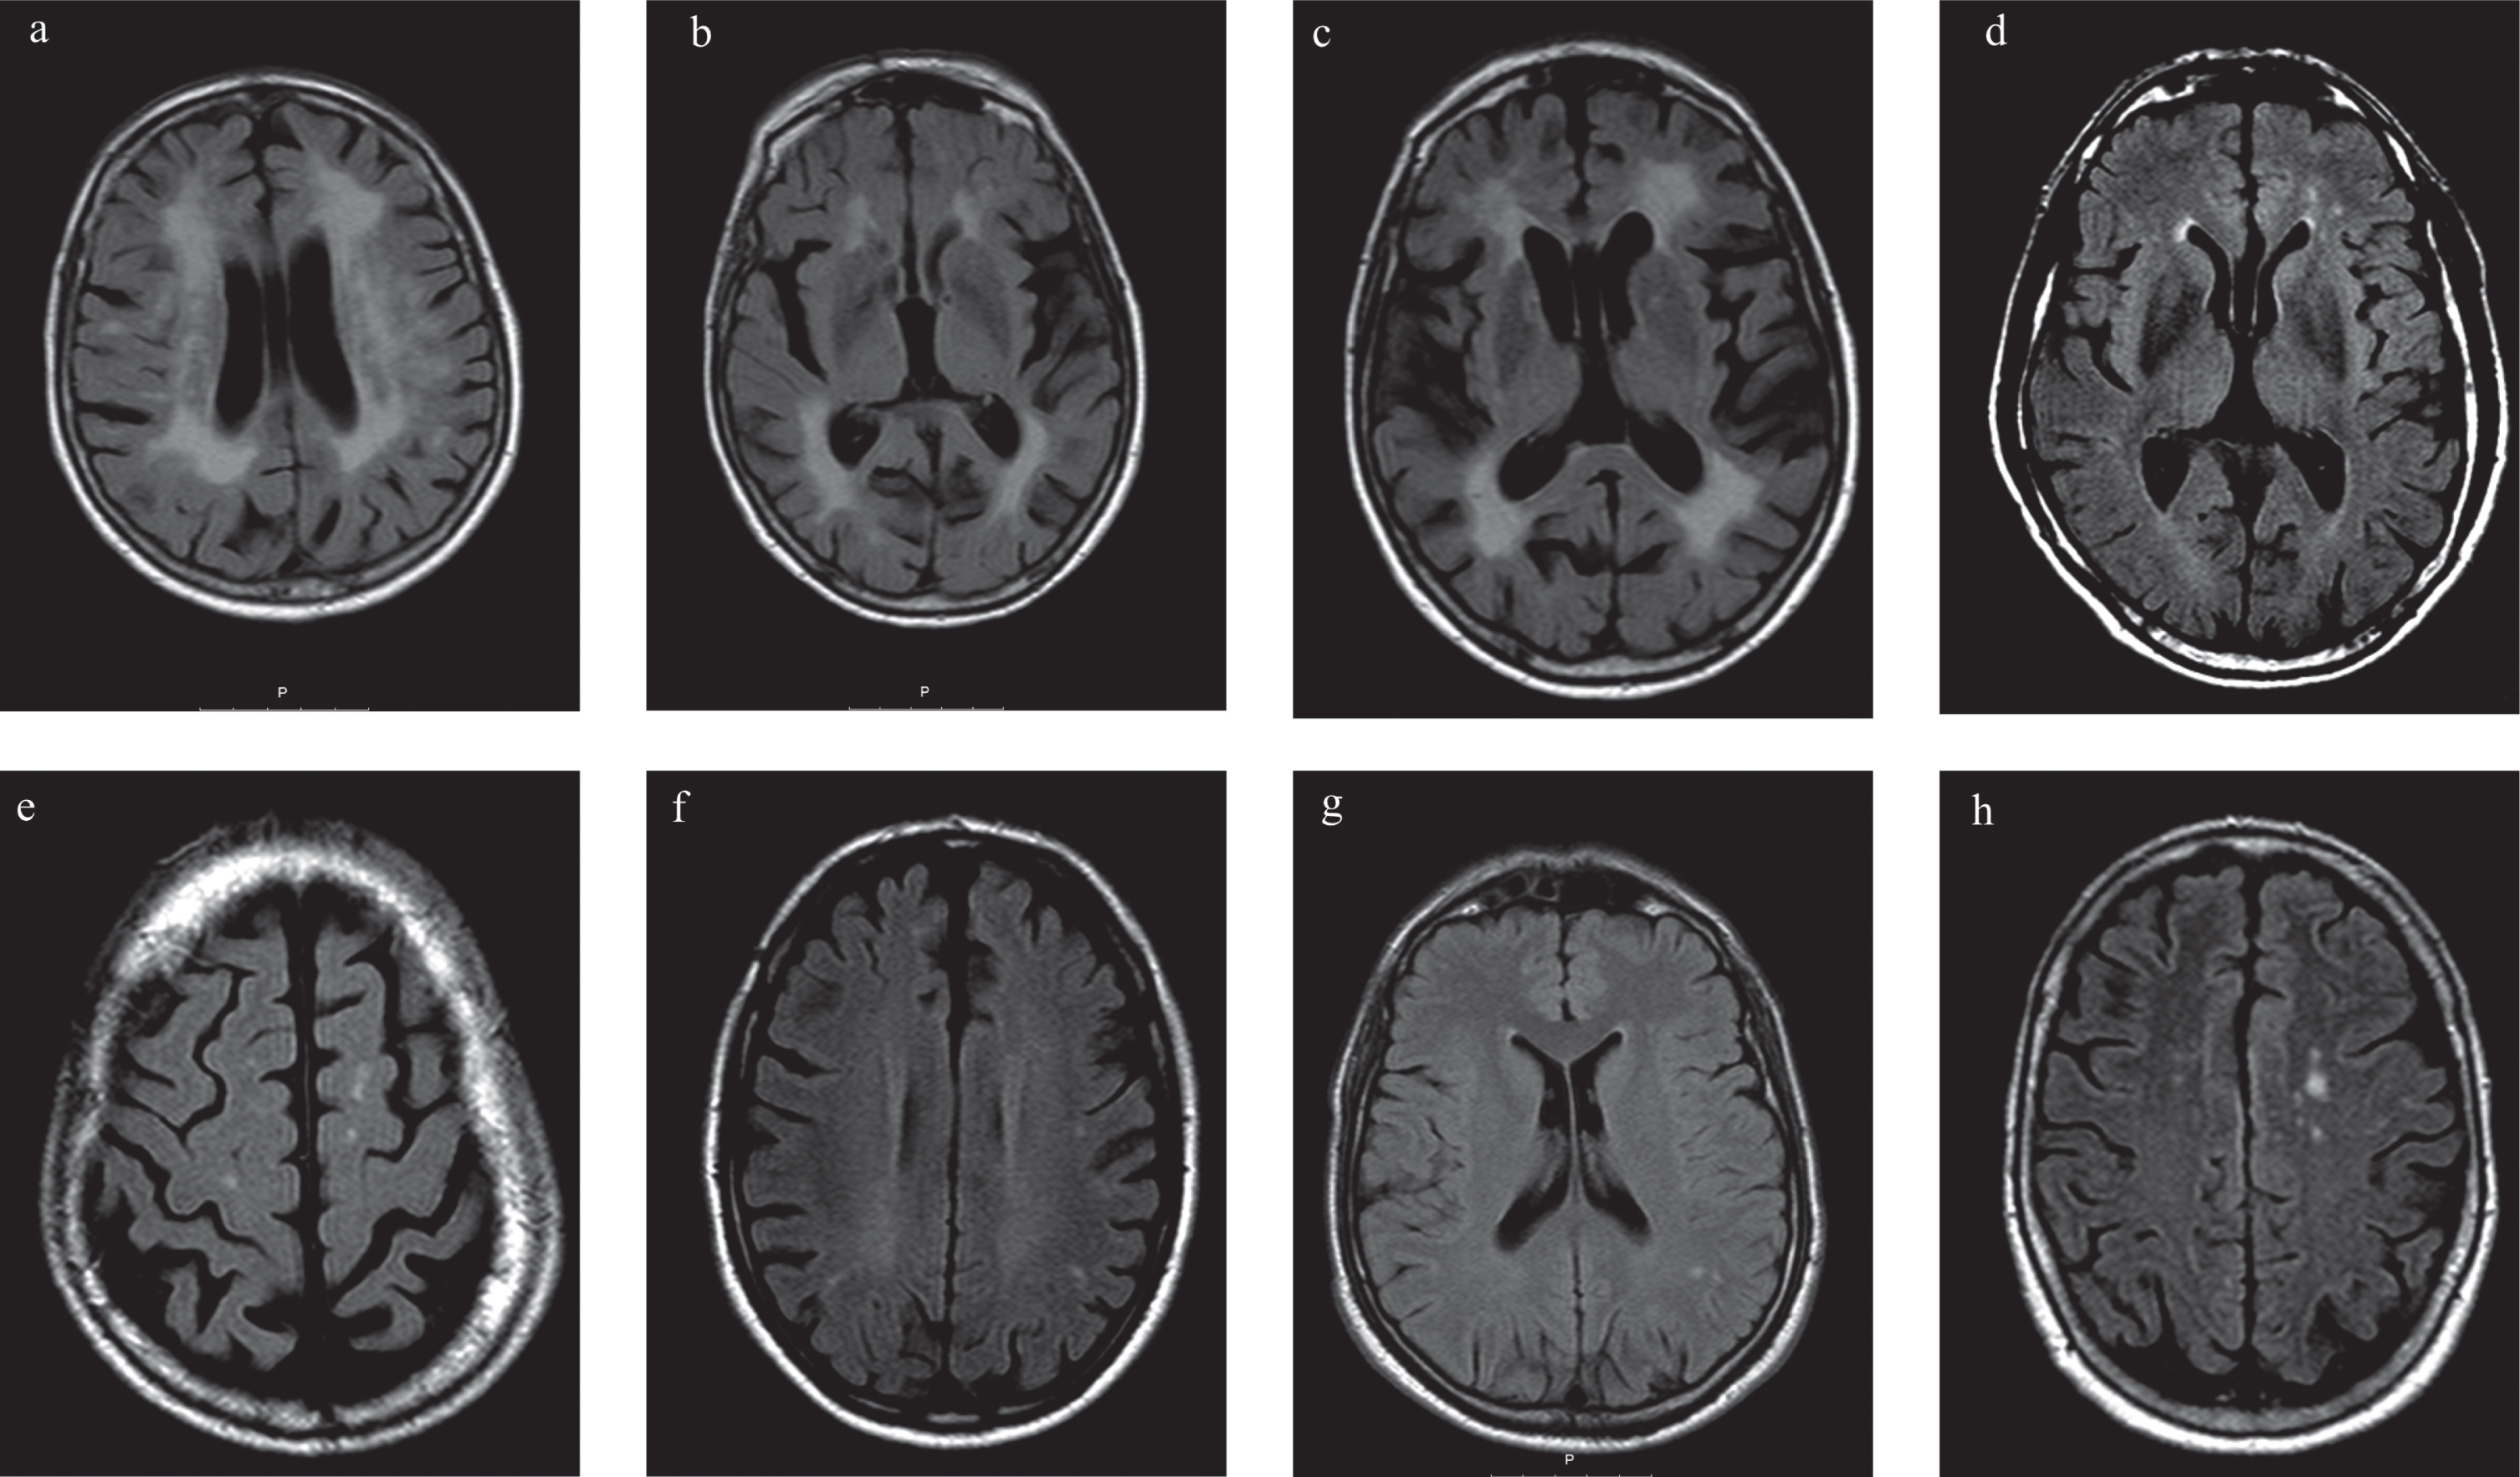 Brain magnetic resonance imaging (MRI) with axial Fluid Attenuated Inversion Recovery (FLAIR) of patients with Fabry disease (FD) and Parkinson’s disease (PD) (P1, P2, P3) and FD without PD (FD+PD–). a, b, c) MRI of P1; a) and b) Diffuse confluent bilateral hyperintensities in the periventricular and subcortical fronto-parietal white matter, suggesting leukoencephalopathy; c) Basal ganglia lacunar infarcts; d, e) MRI of P2, Frontal periventricular and subcortical white matter hyperintensities; f) MRI of P3, Frontoparietal periventricular and subcortical white matter hyperintensities; g) MRI of 43 years old, male with FD+PD–, White matter hyperintensities in the left parietal subcortical white matter; h) MRI of 75 years old, female FD+PD–patient, with multiple white matter hyperintensities in the subcortical frontoparietal regions and centrum semiovale.